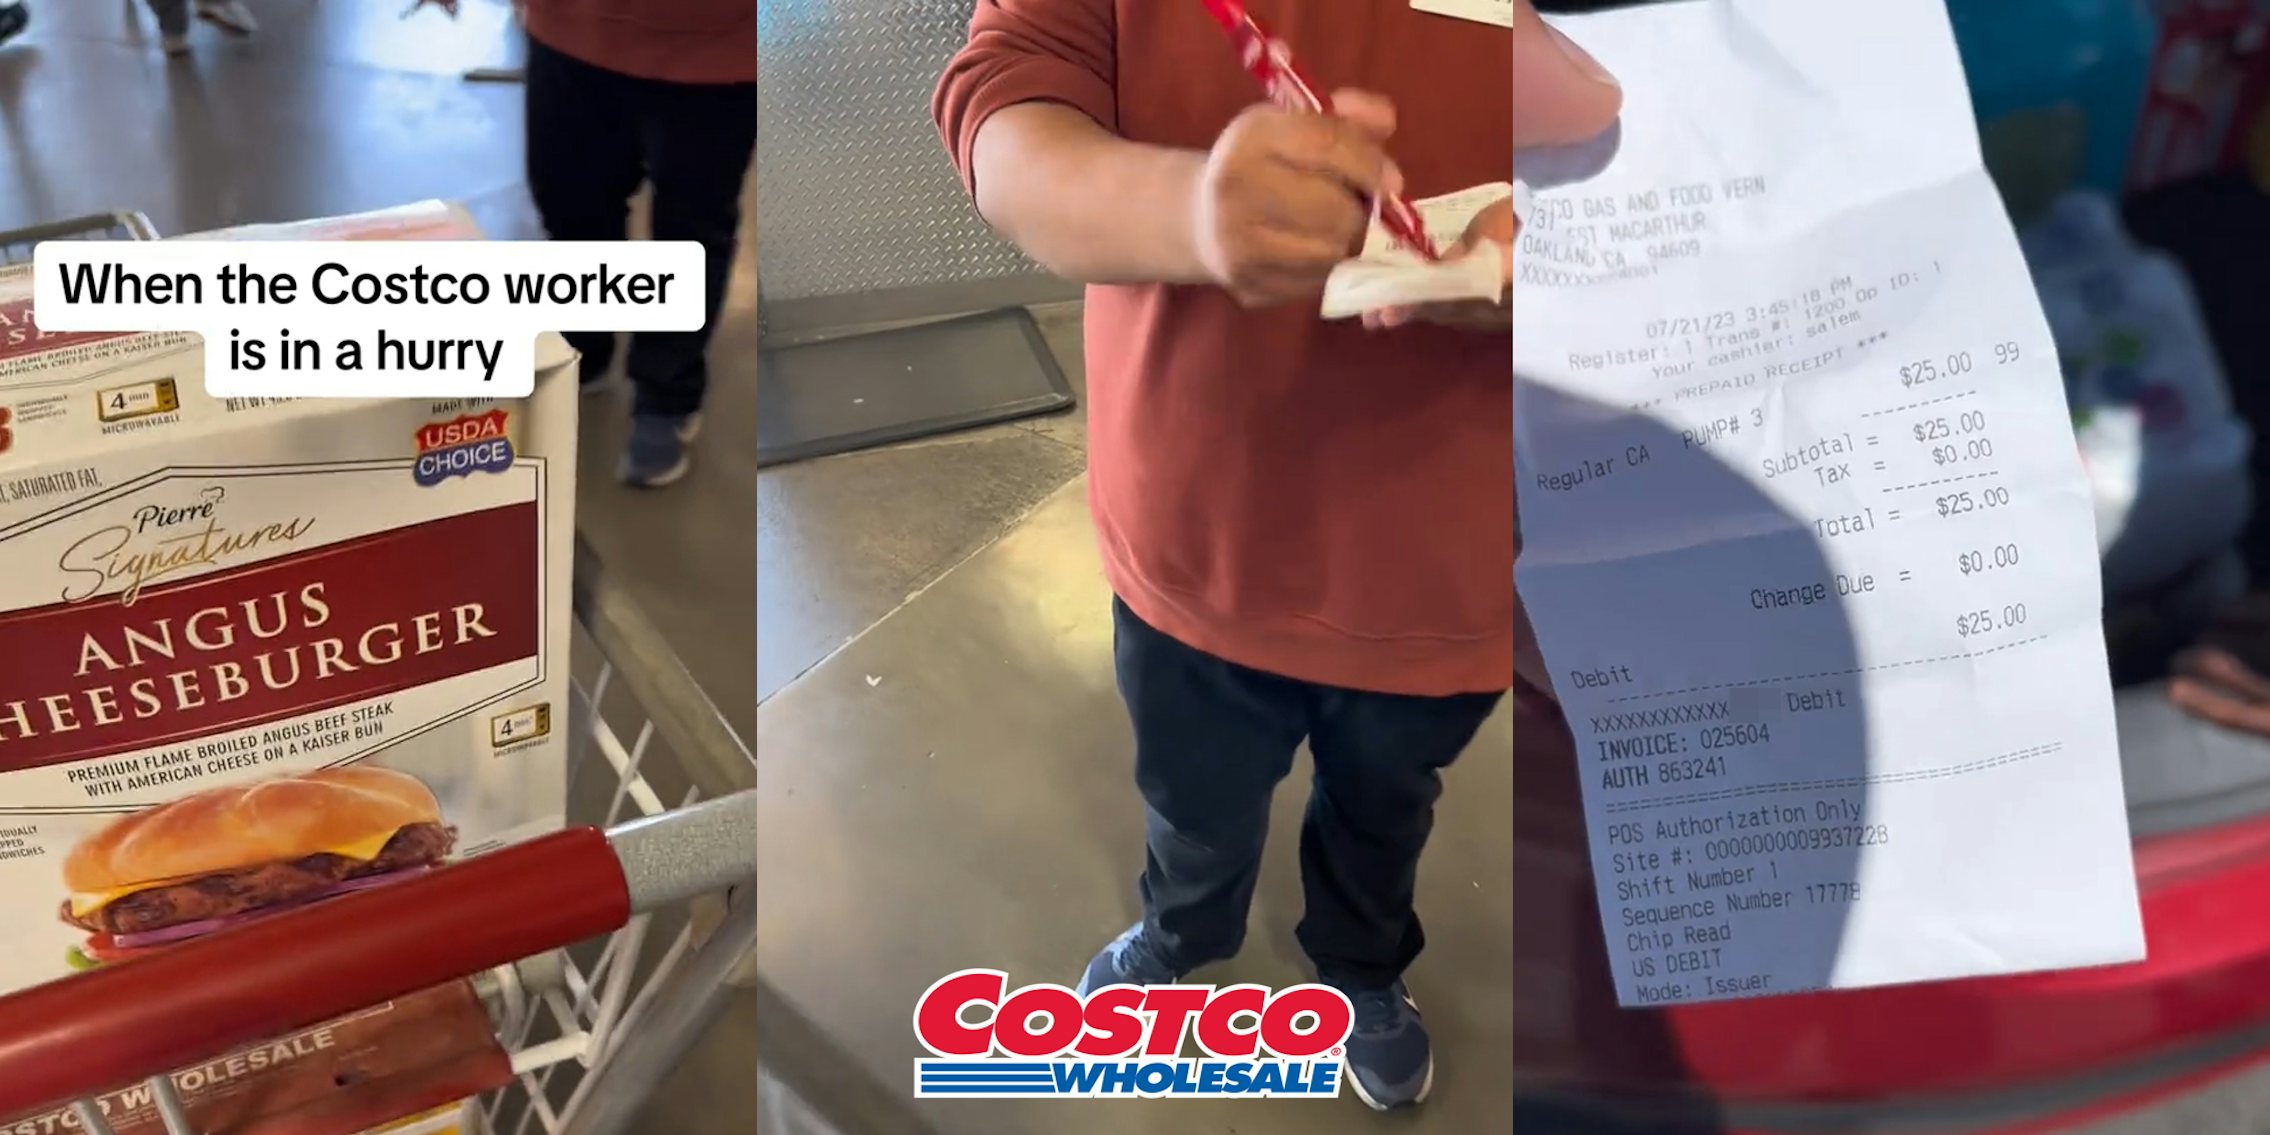 Costco customer with cart with caption 'When the Costco worker is in a hurry' (l) Costco worker checking receipt with pen with Costco logo at the bottom (c) gas station receipt in hand in front of open trunk (r)